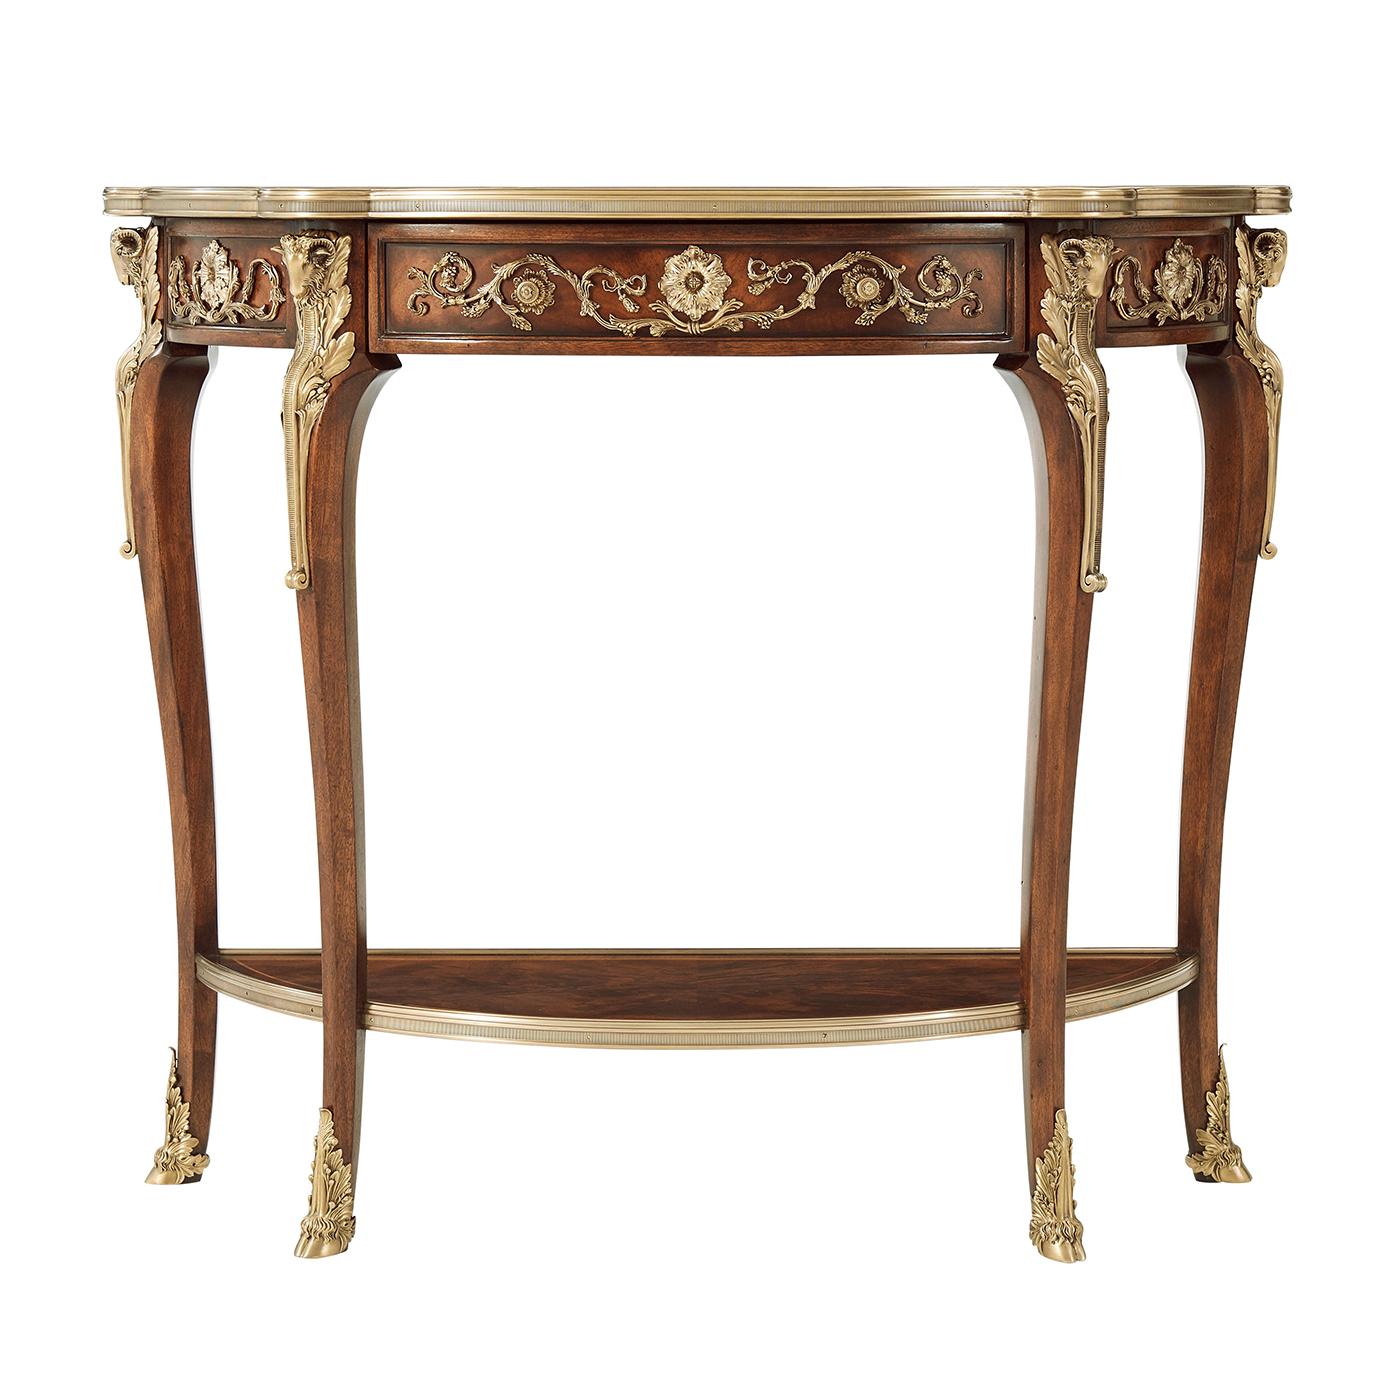 A Louis XV style mahogany and rosewood banded console table applied with very fine brass mounts, the brass bound top with a frieze drawer, on ram's head capital cabriole legs with hoof feet joined by an under tier. 

Dimensions: 40.25